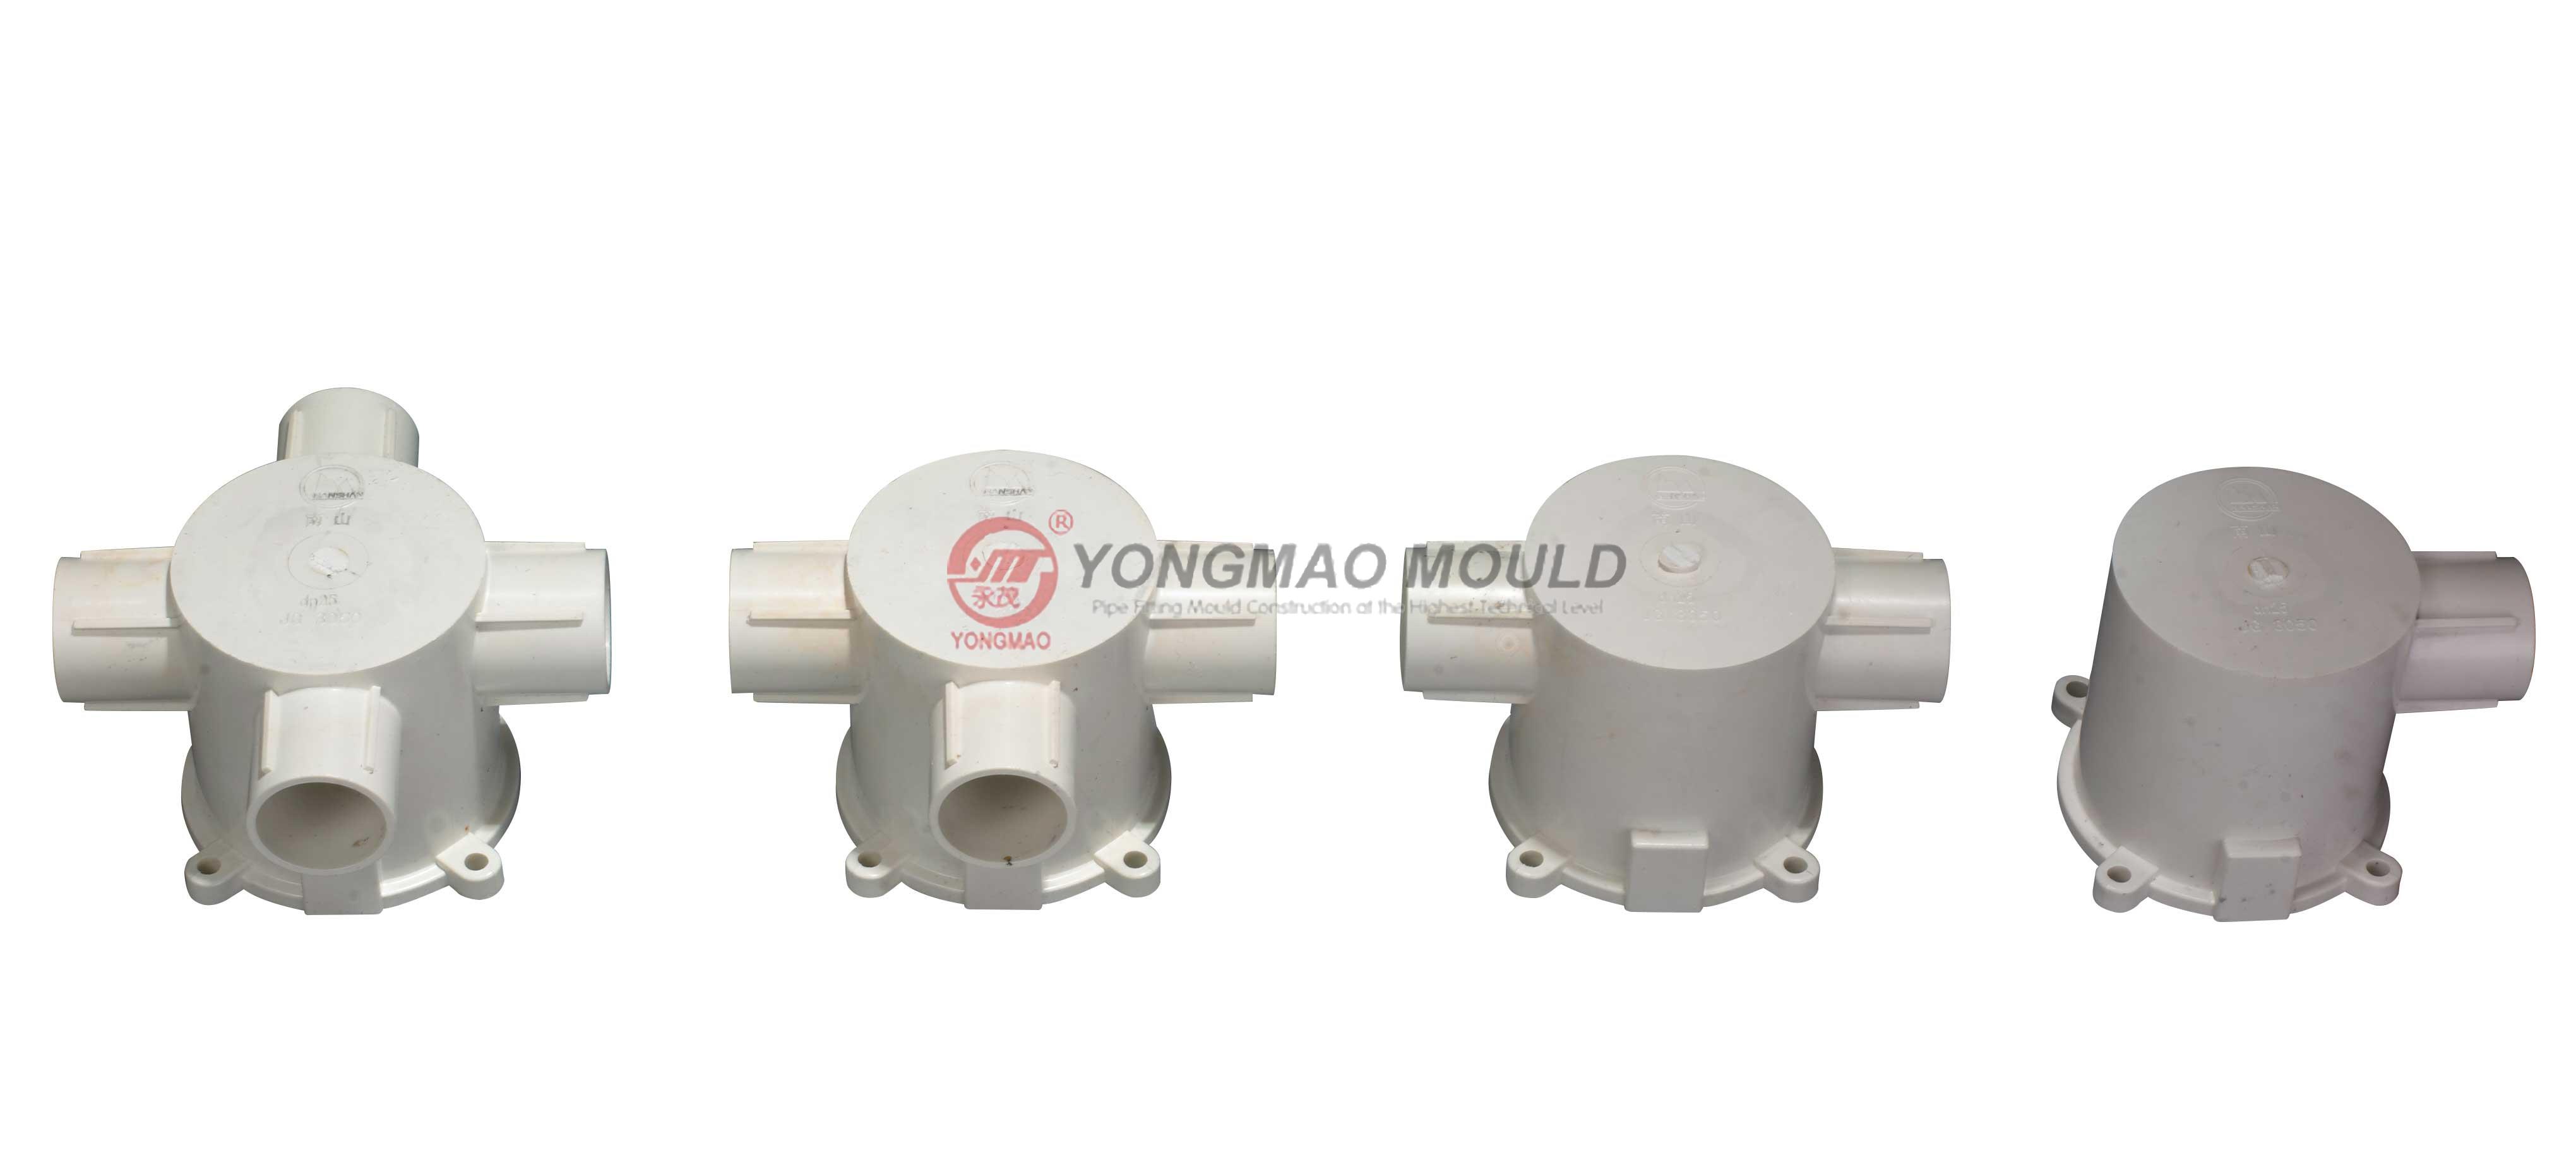 PVC PIPE FITTING38